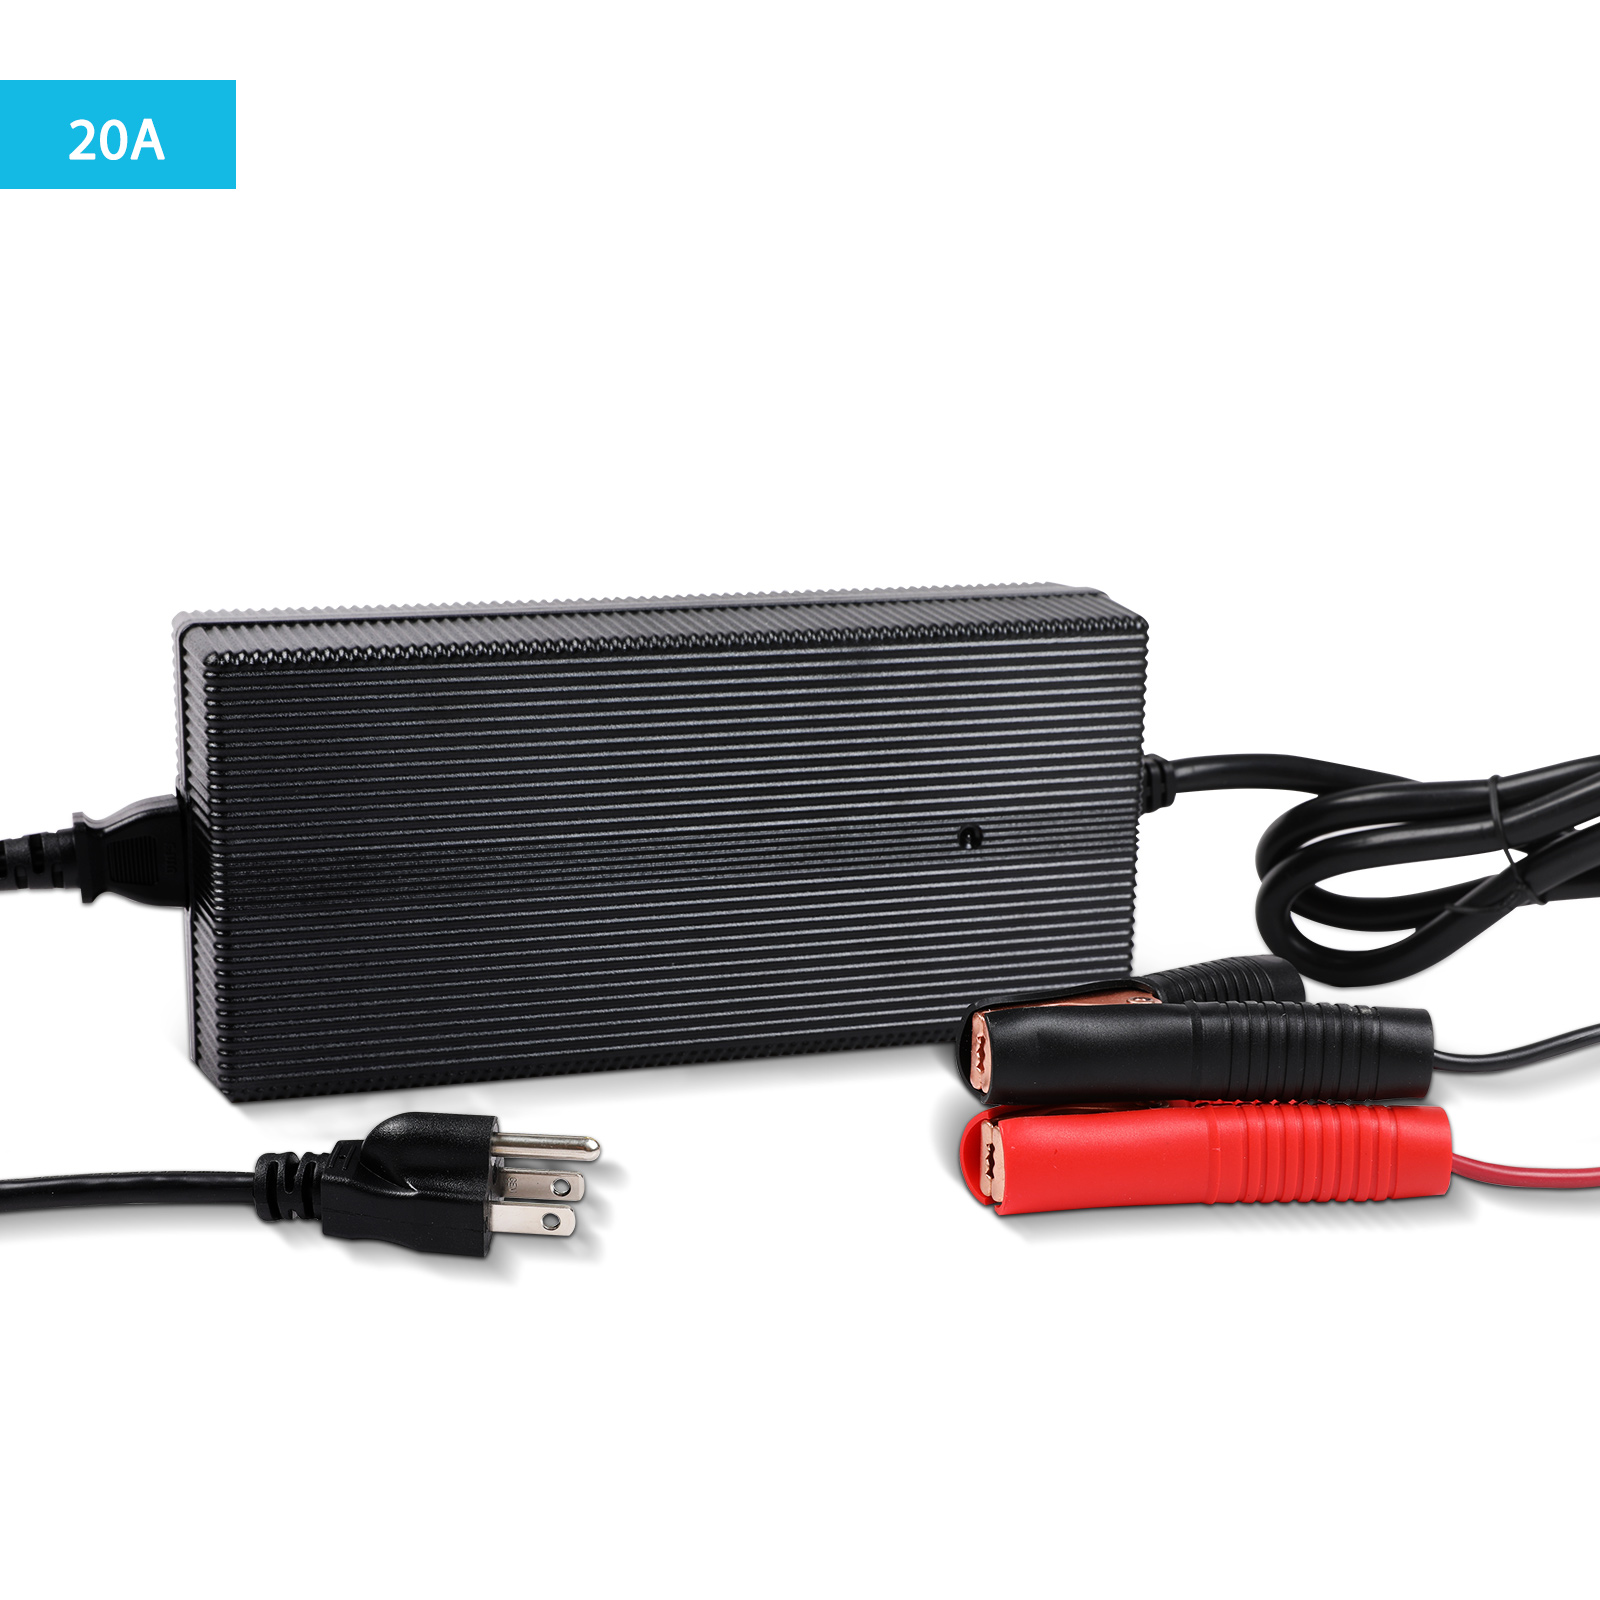 20A LFP Portable Battery Charger